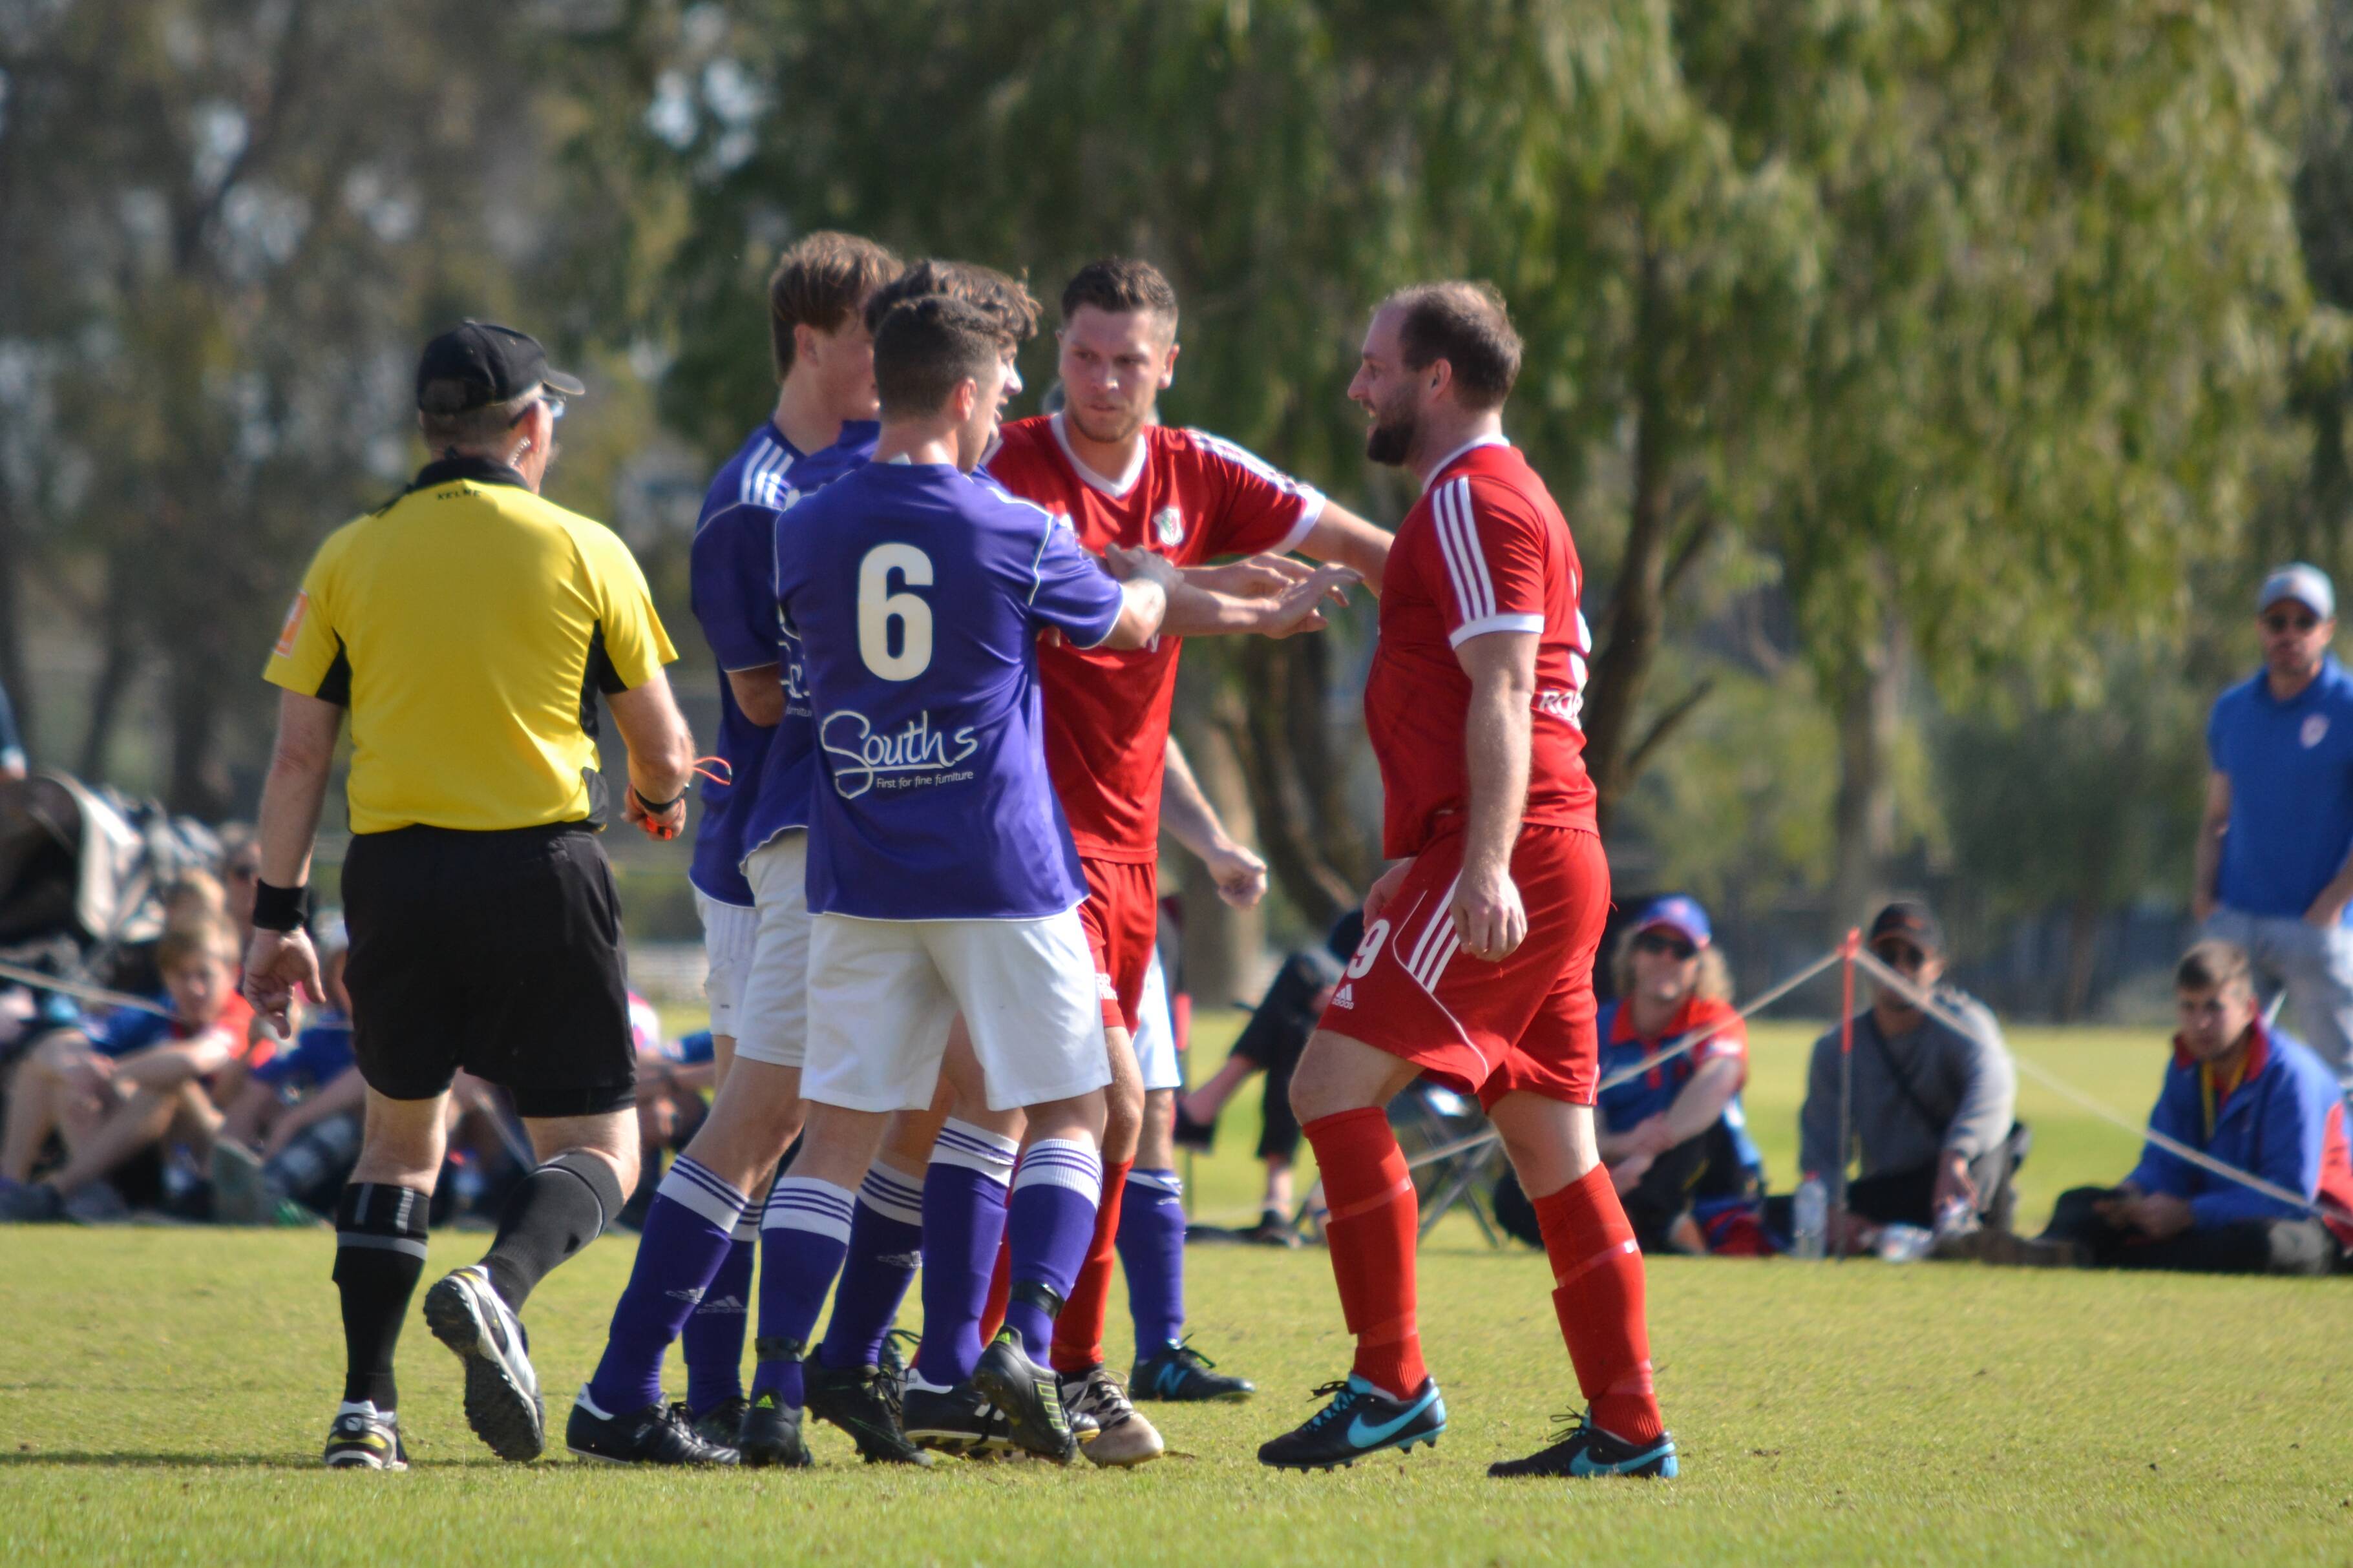 Football Margaret River comes home with SWSA premier league titles for both  men's and women's sides